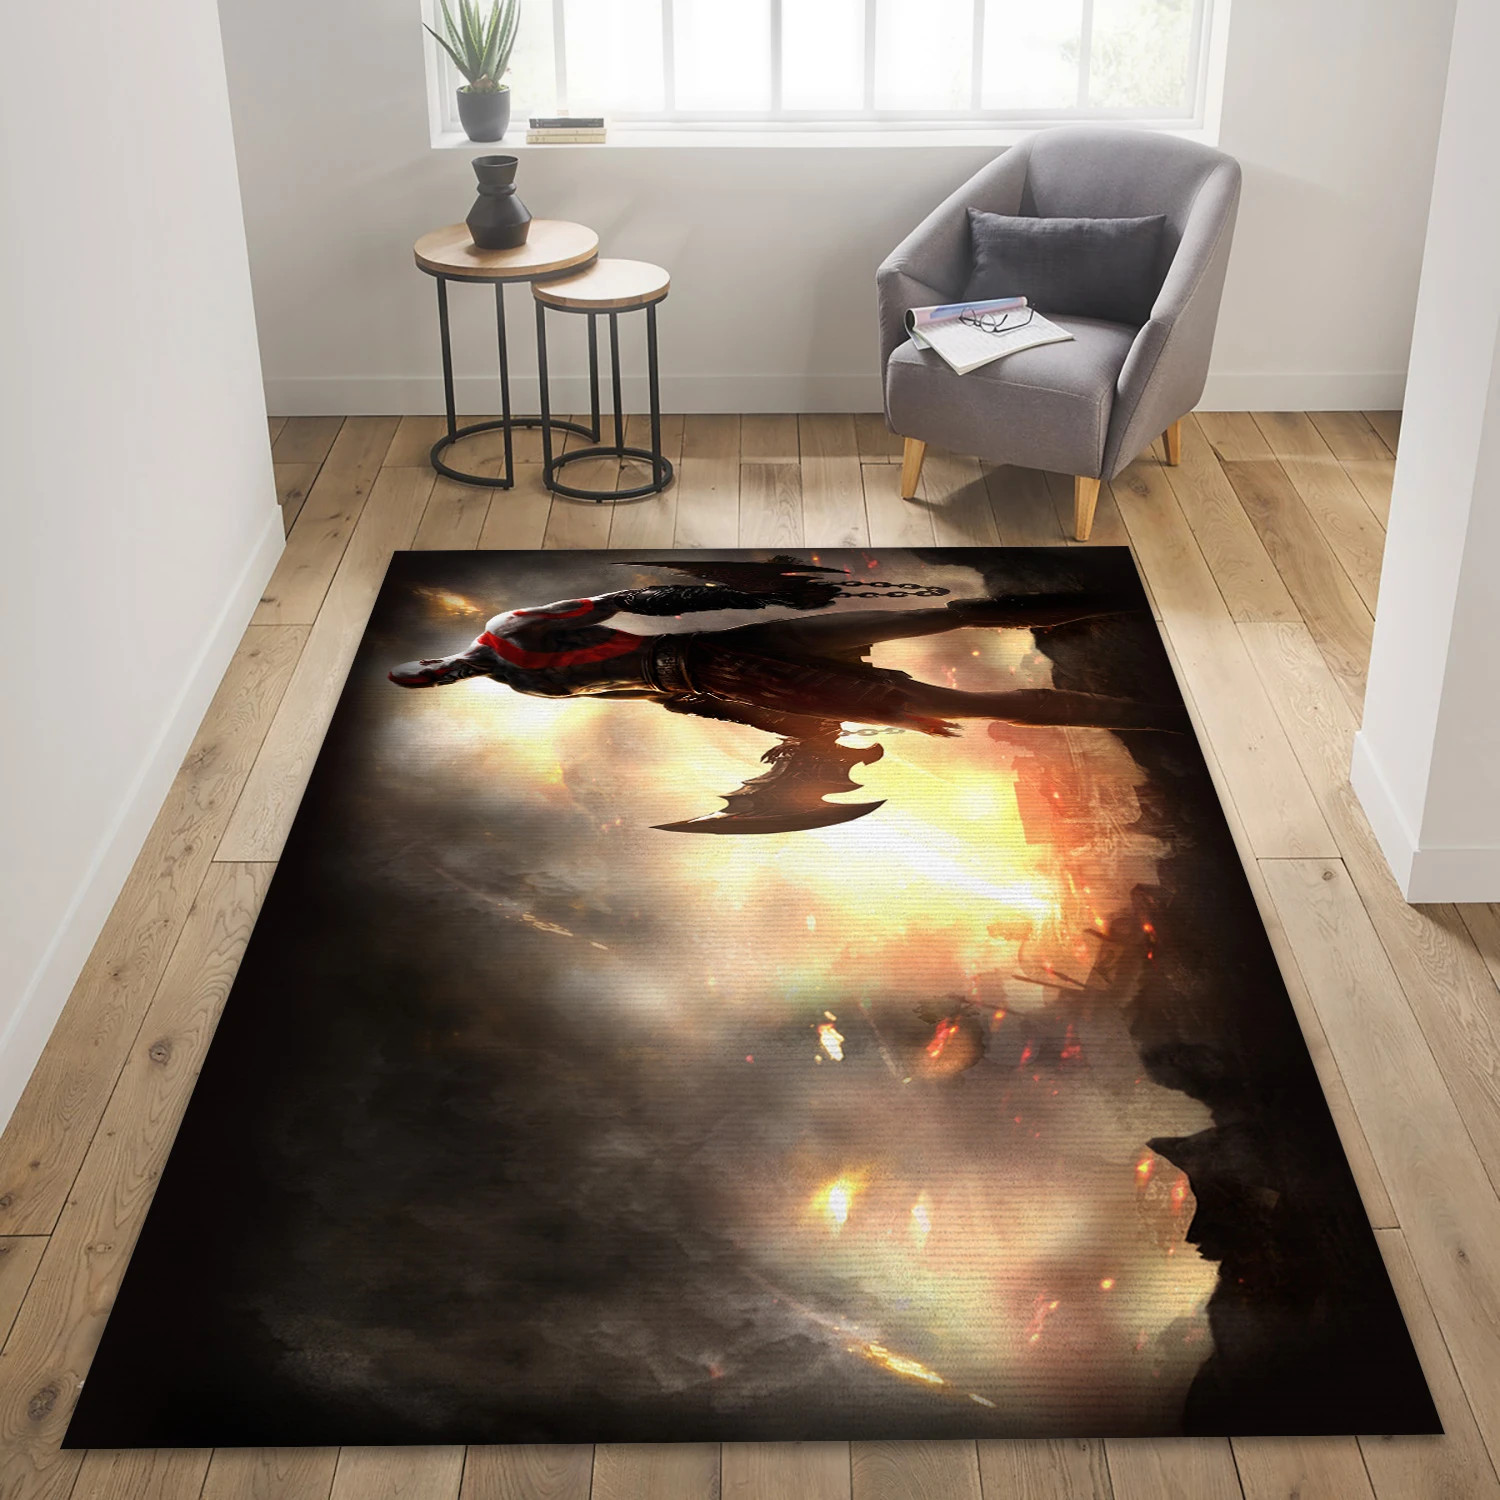 God Of War Video Game Area Rug For Christmas, Bedroom Rug - Christmas Gift Decor - Indoor Outdoor Rugs 3